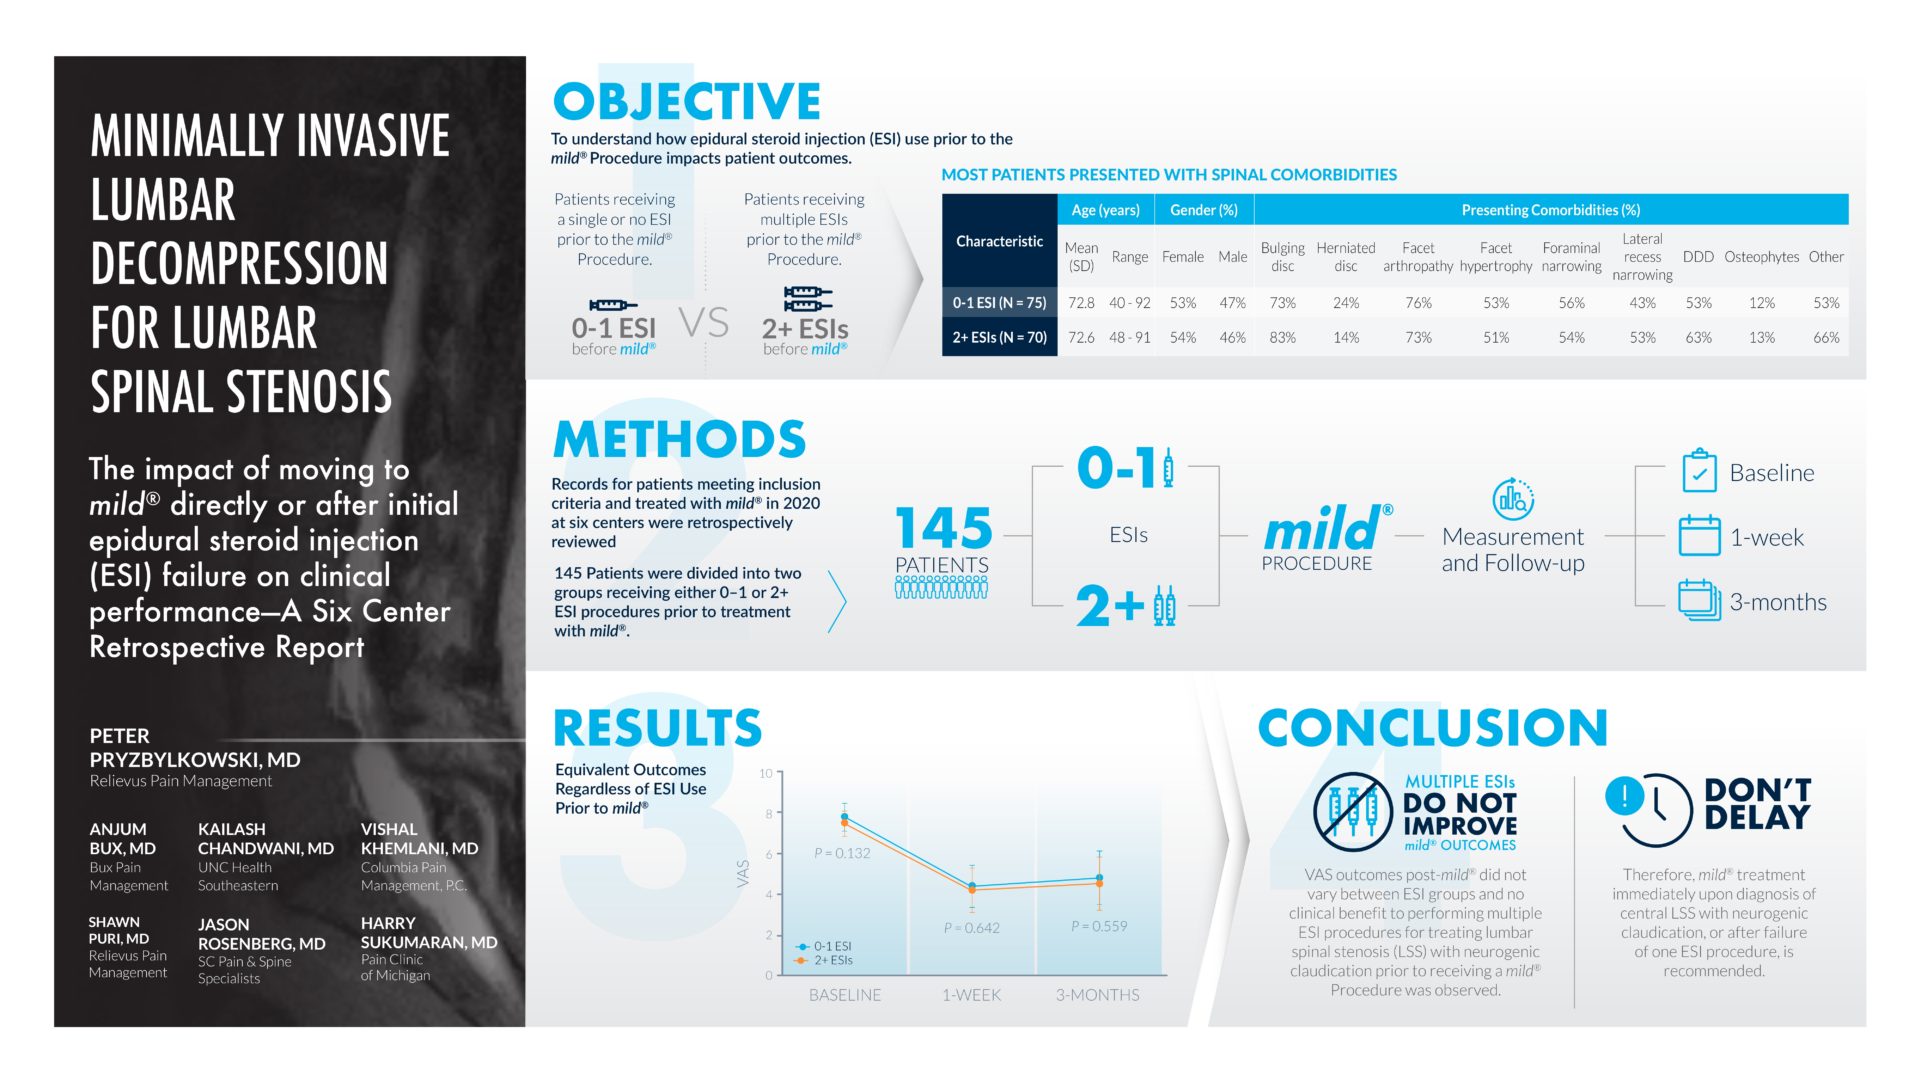 Infographic showing objective, methods and results of minimally invasive lumbar decompression for lumbar spinal stenosis